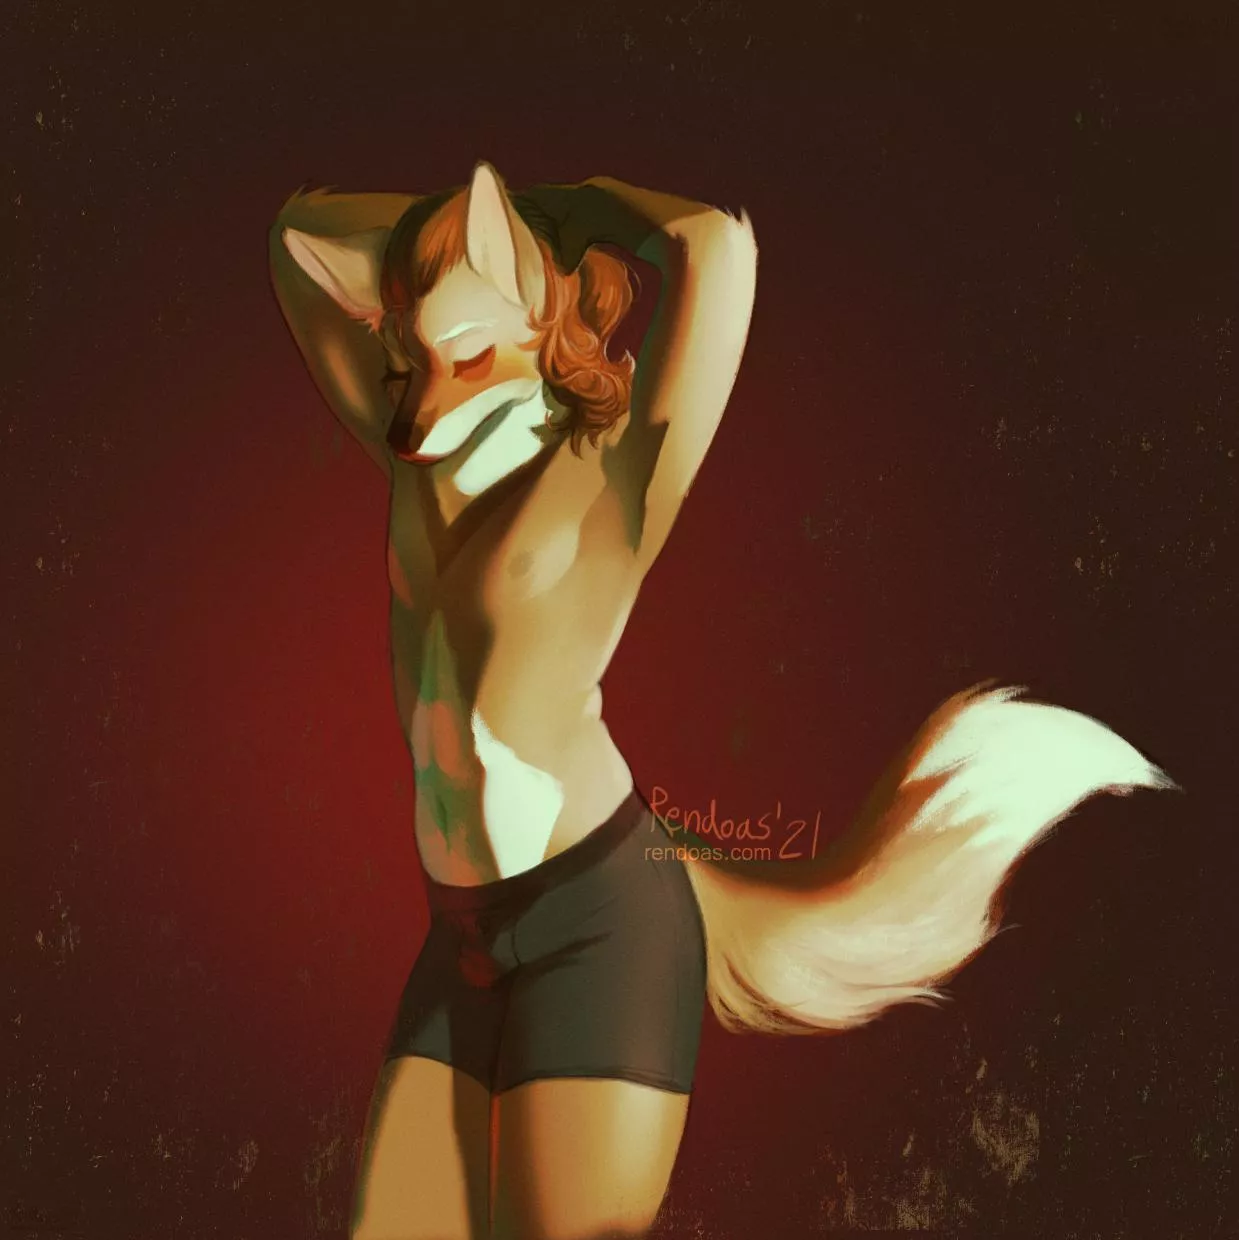 Maned Wolf Furry Porn - Q i painted a pinup of my partners maned wolf nudes in furry | Onlynudes.org